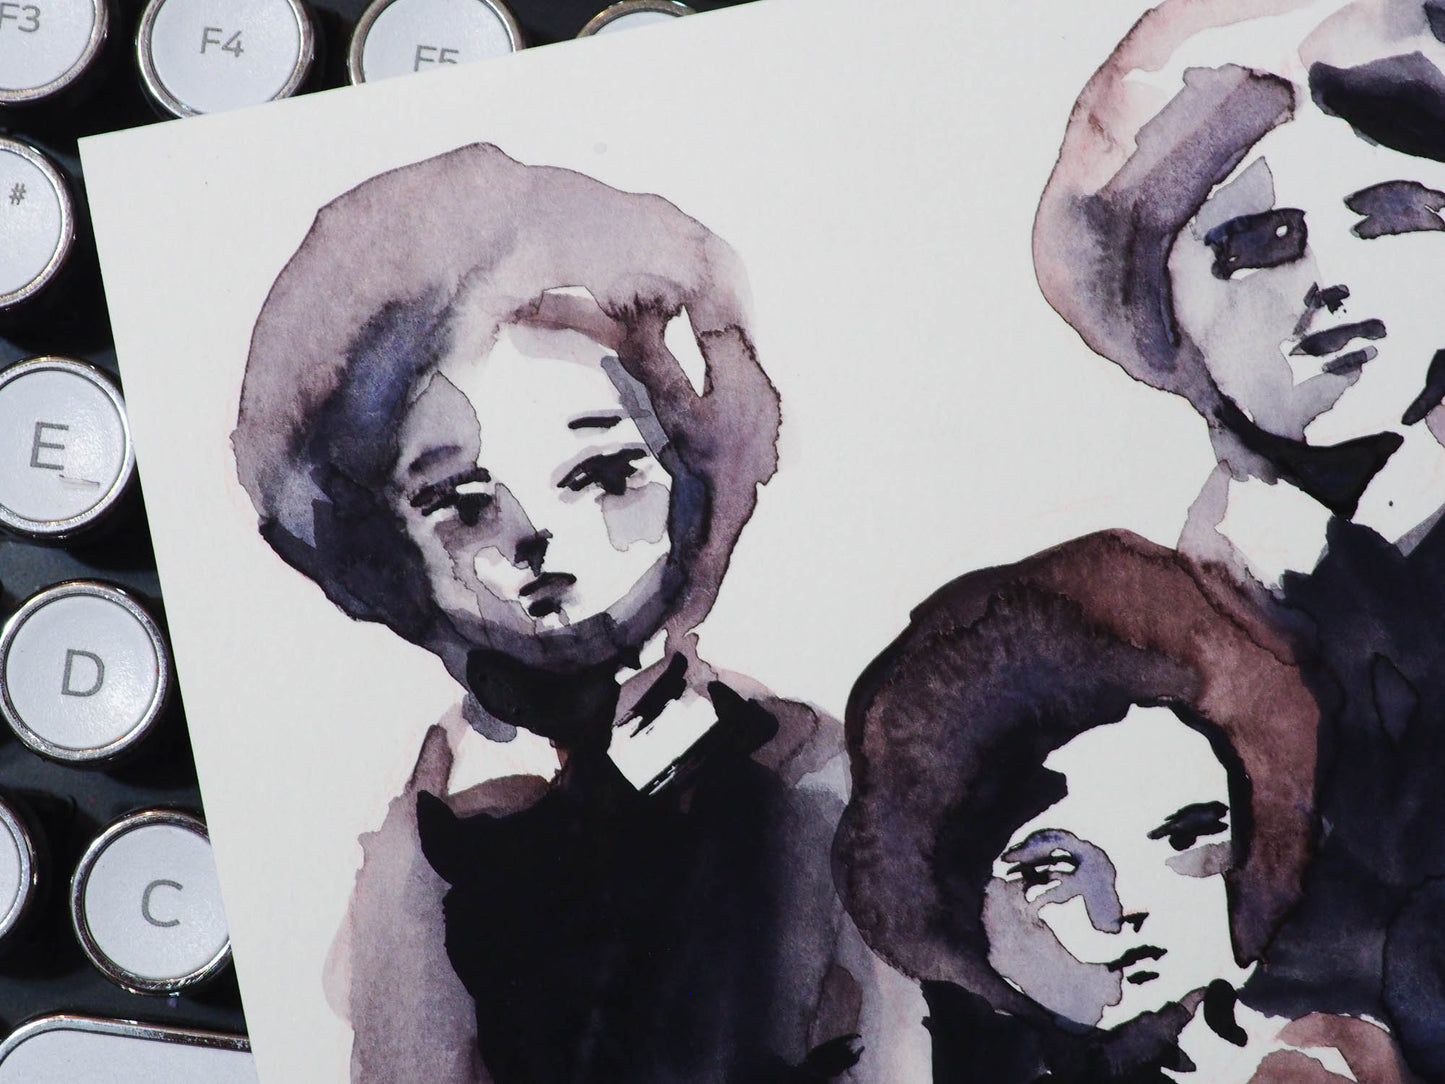 Original watercolor painting on paper by Danita Art. A vintage family portrait of four women got transformed into a beautiful watercolour painting ready to be framed and treasured as a family heirloom.